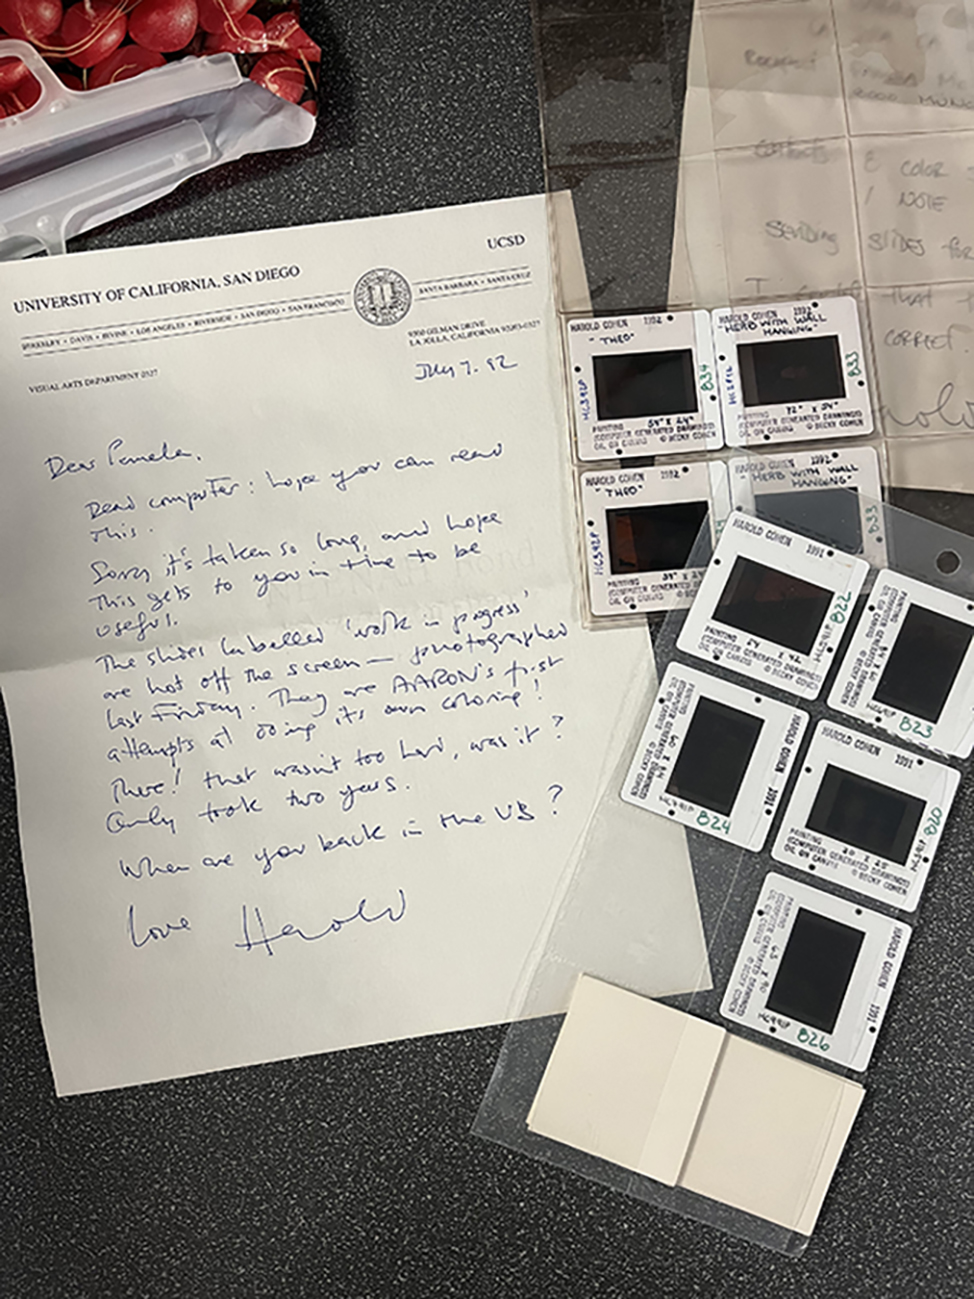 Letters and images from McCorduck's papers, held by the University Archives.